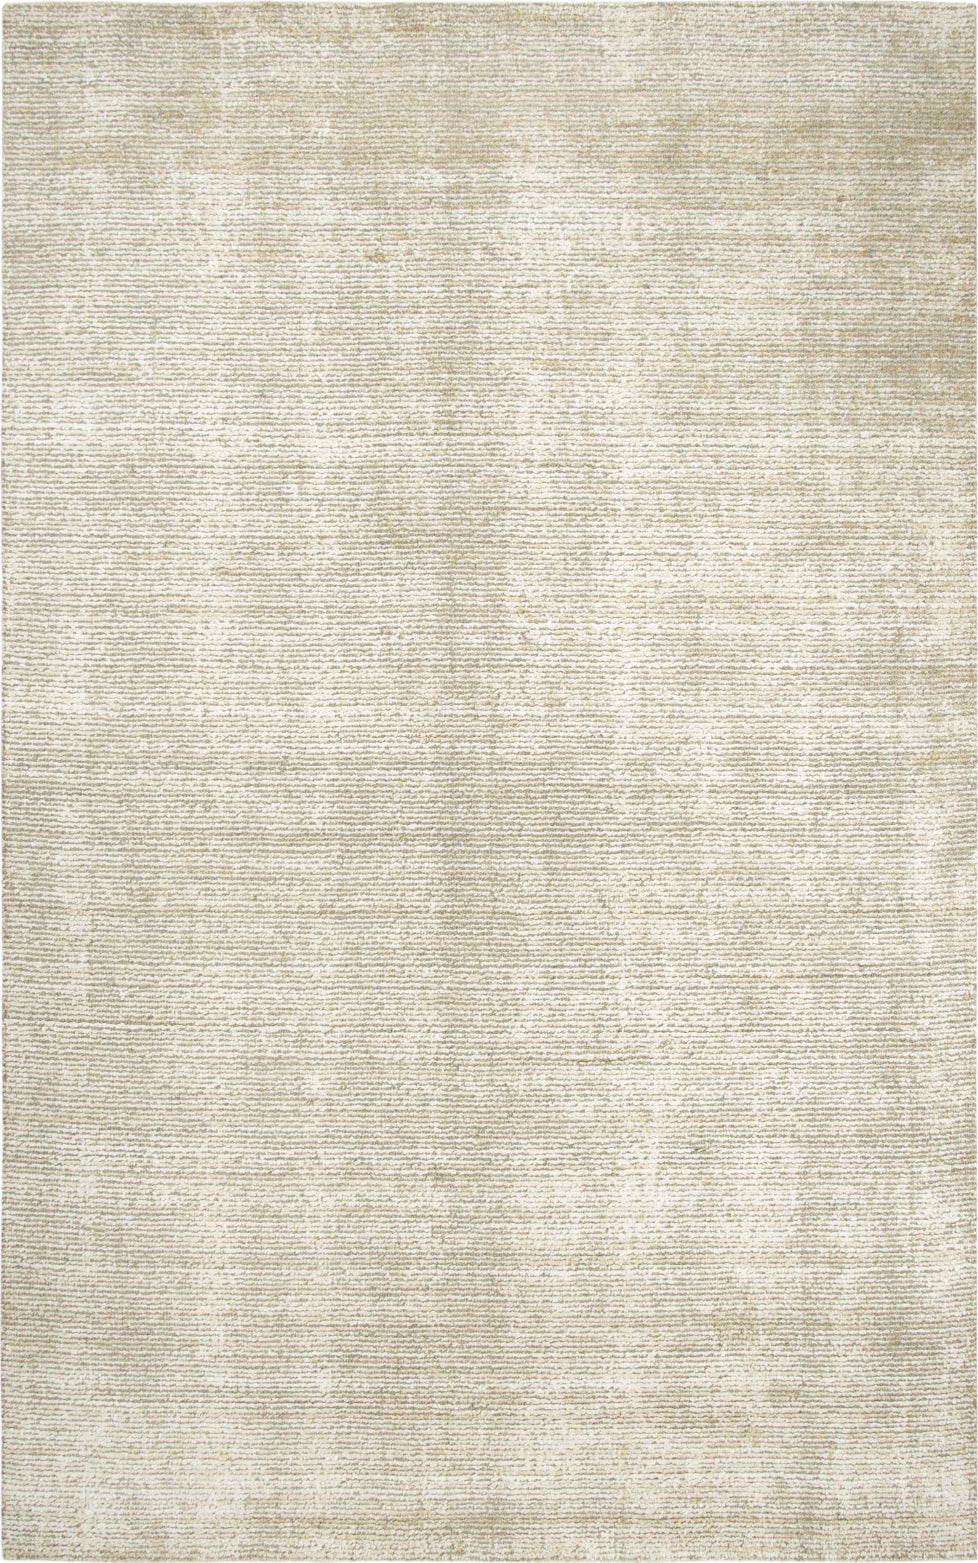 Rizzy Grand Haven GH720A Beige Area Rug main image